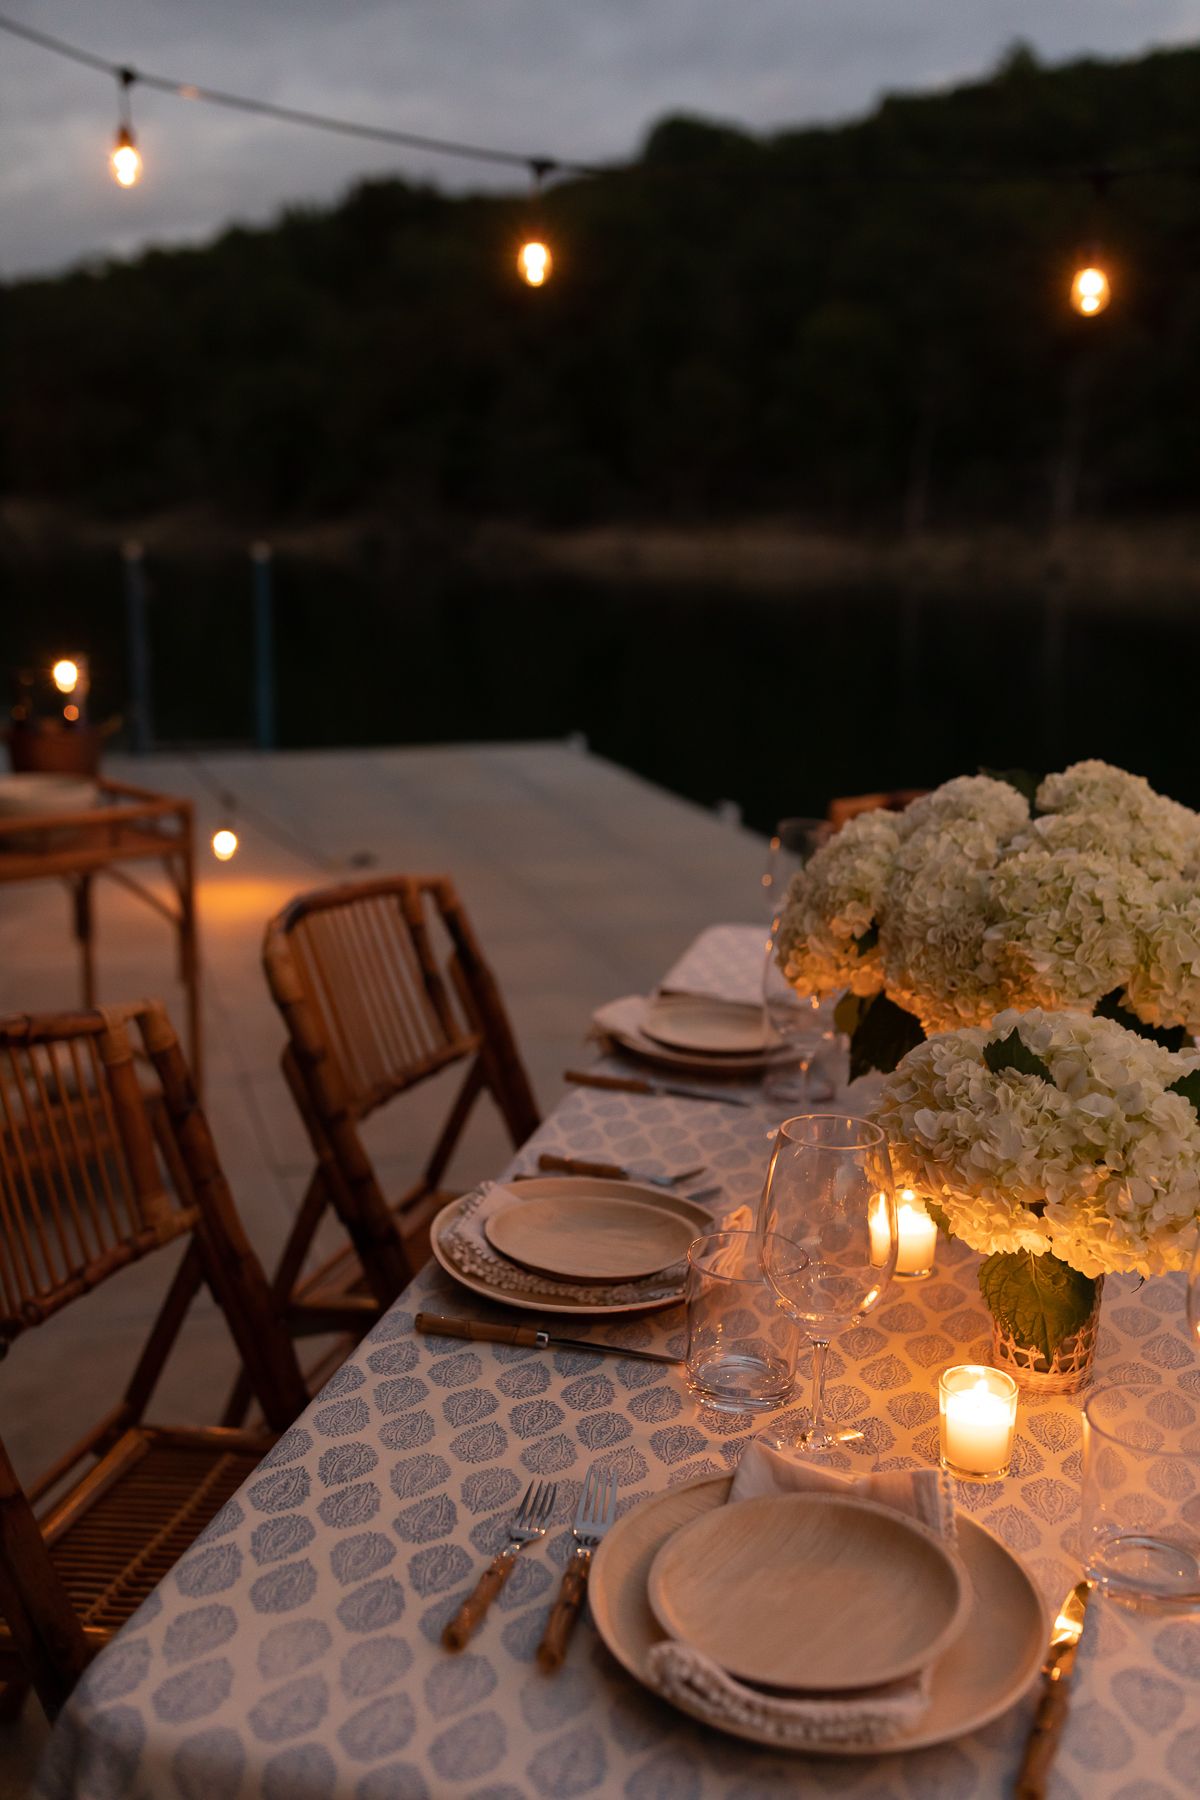 outdoor string lights set up over a dining table on a dock, water in the background